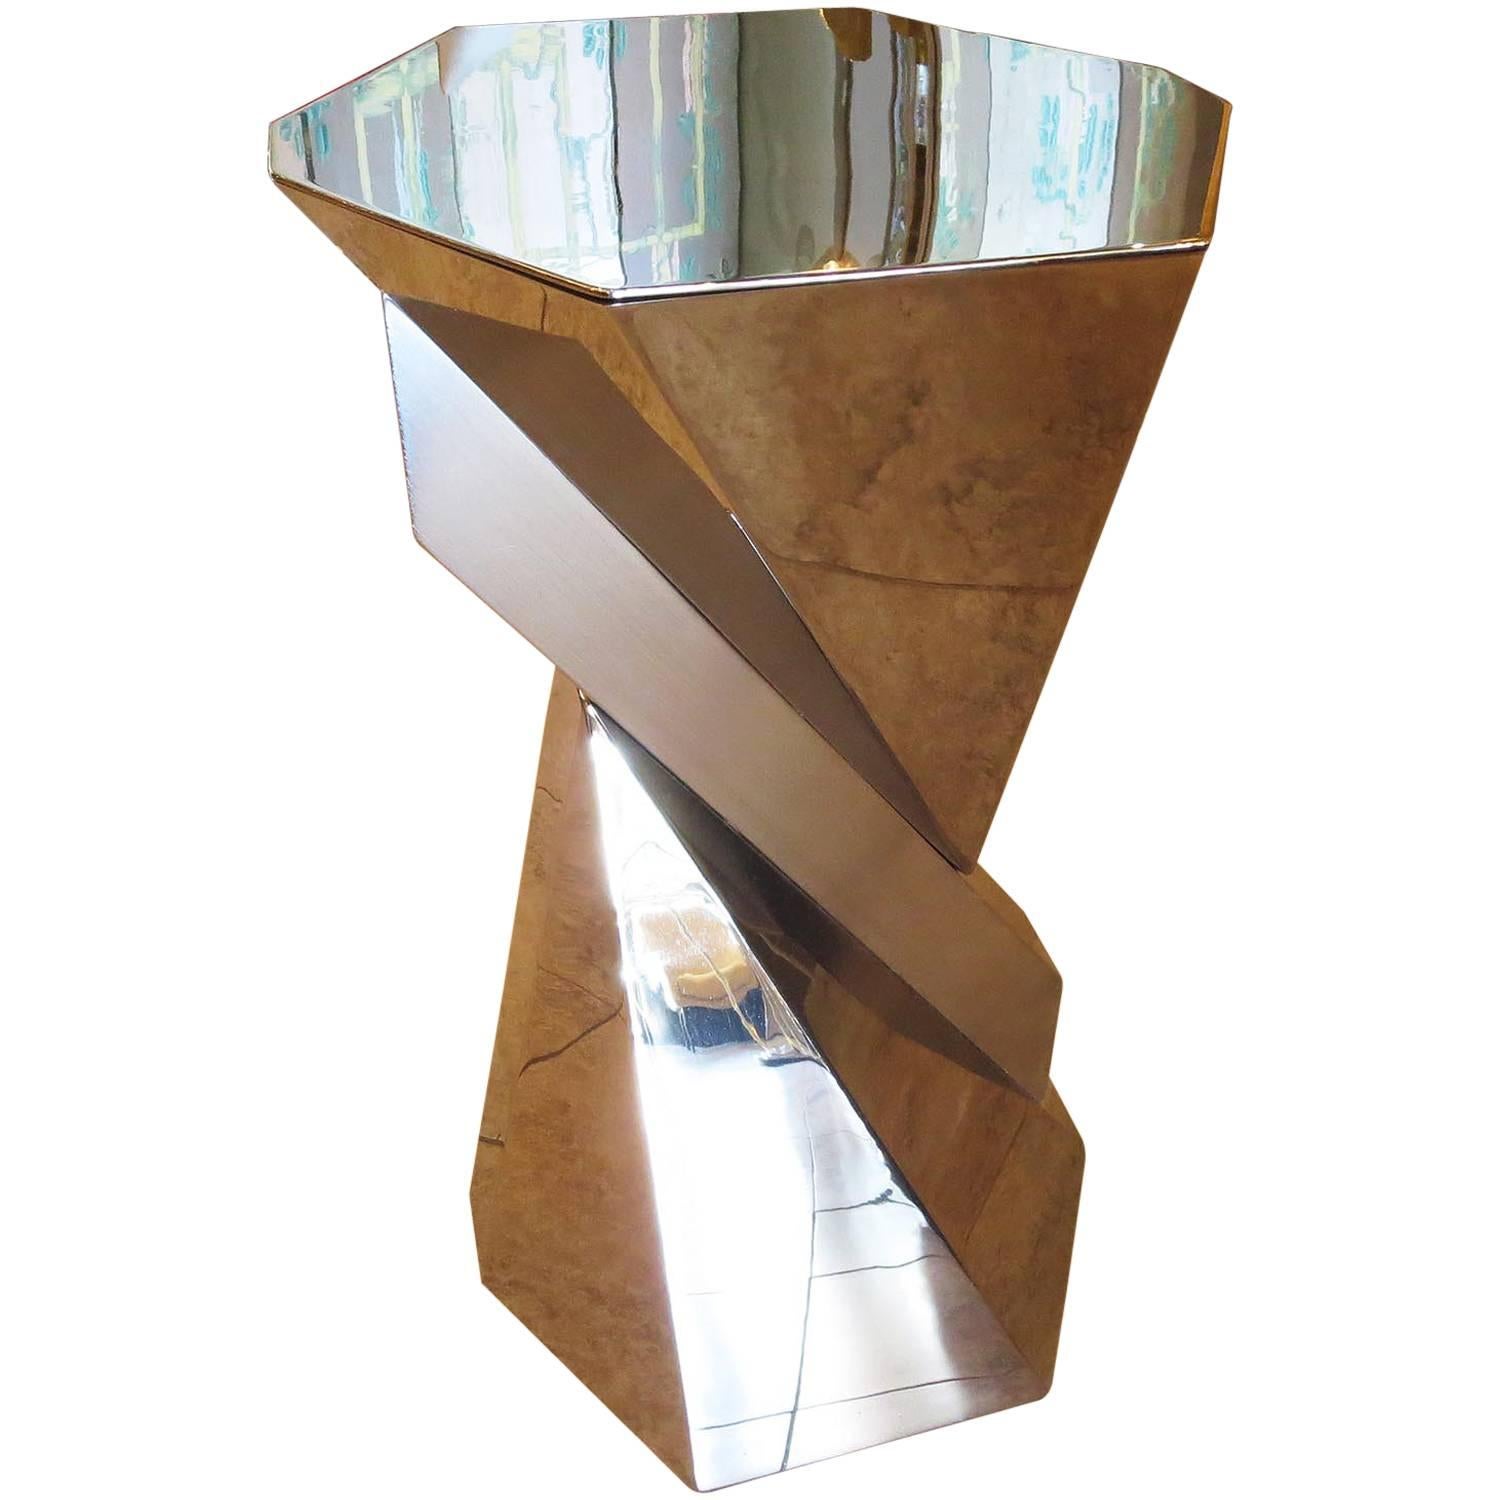 Cubist Pedestal or Side Table in Mirrored Stainless Steel